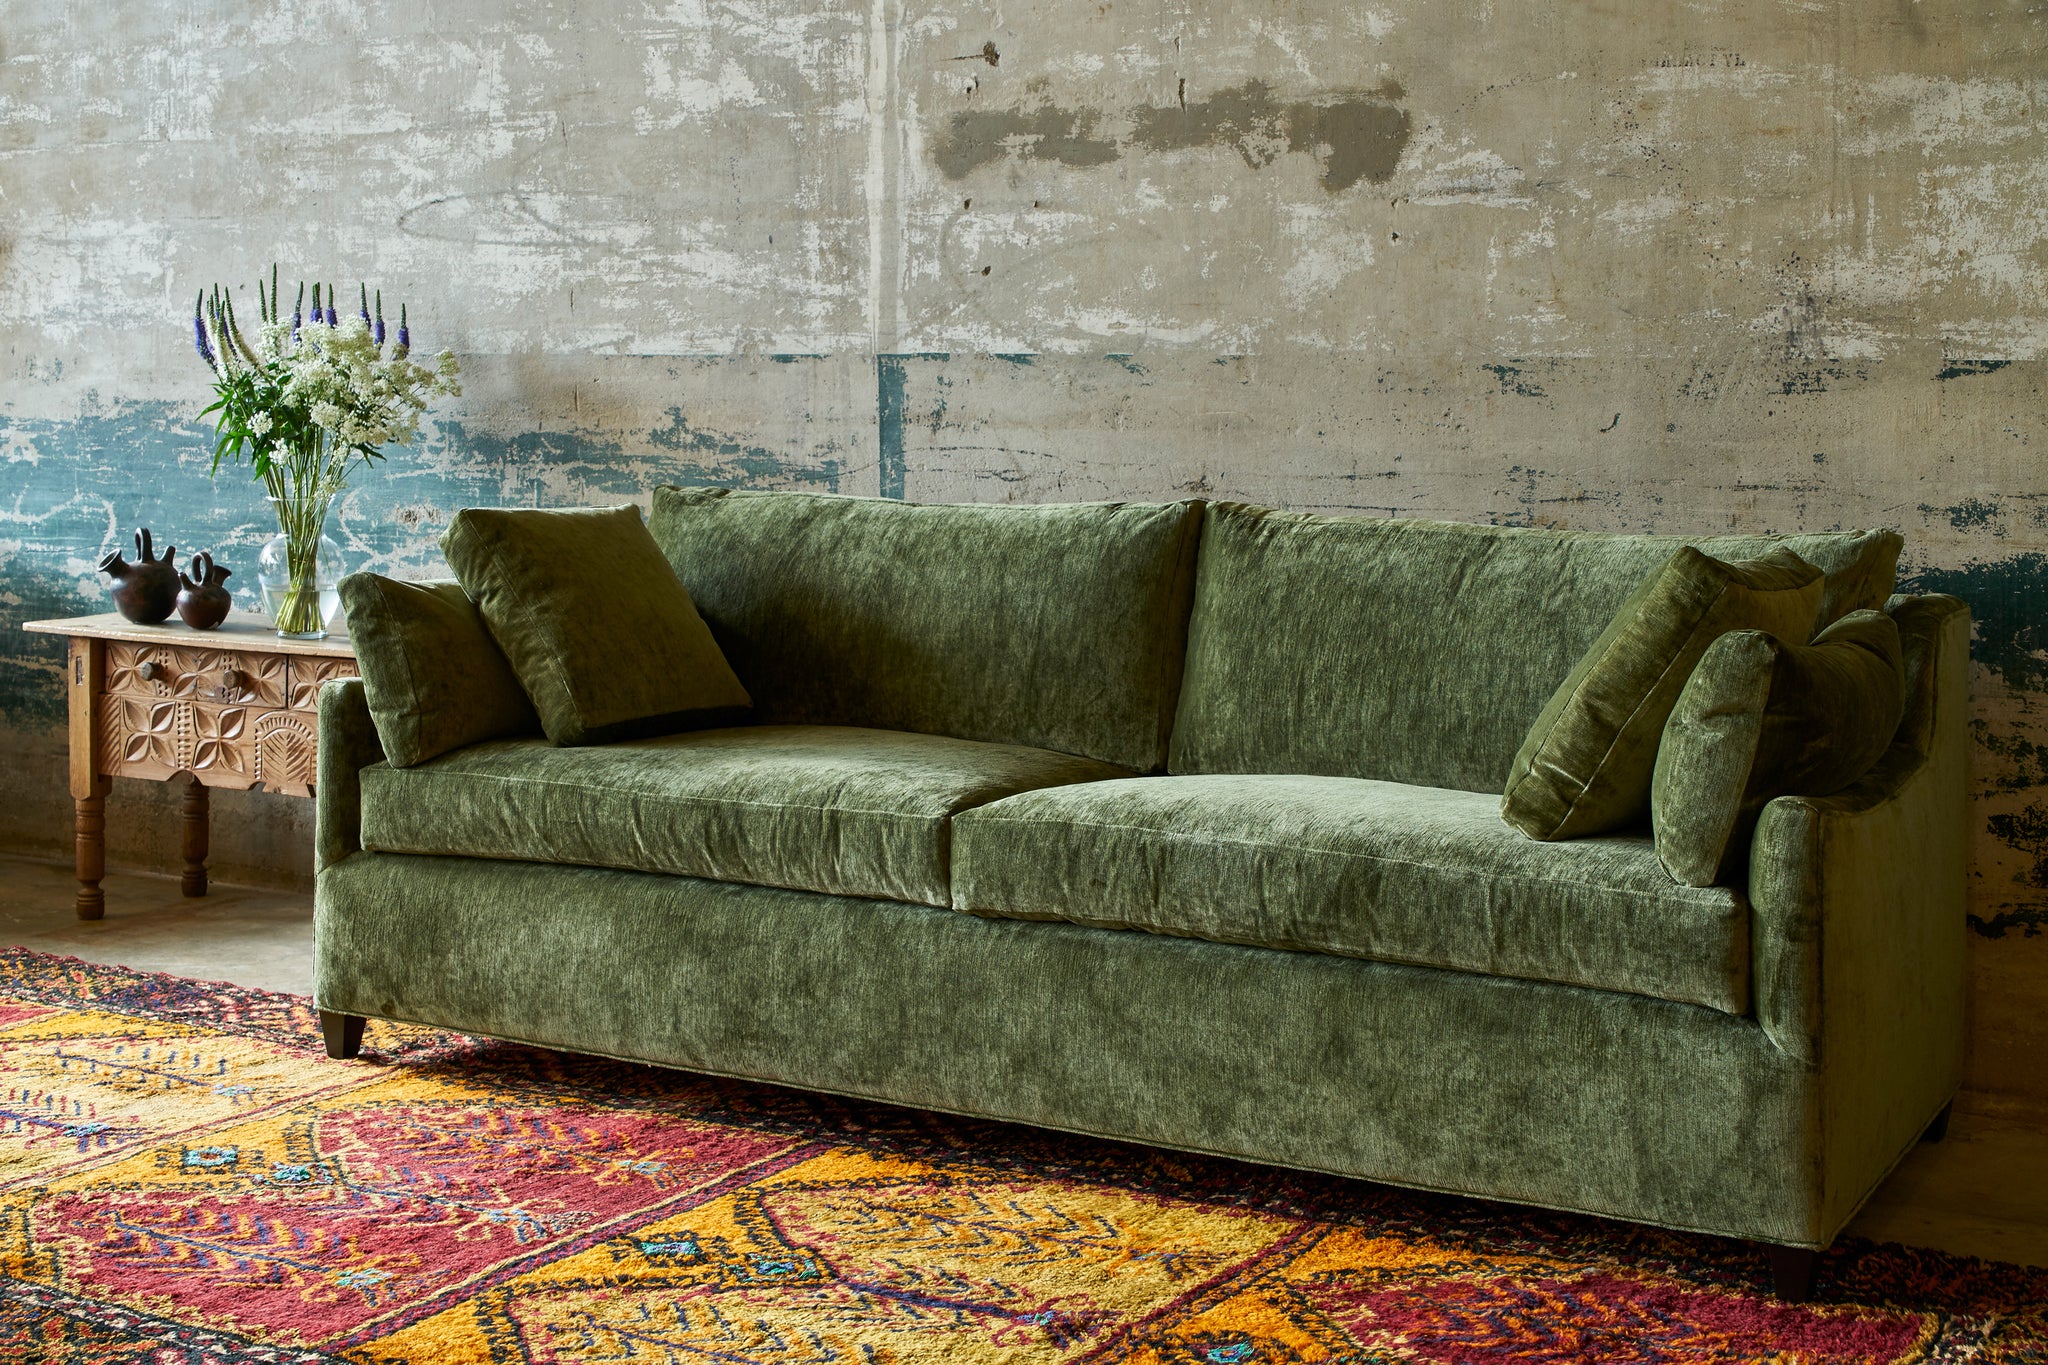  Milo Sofa in a green velvet in front of a concrete wall and a Guatemalan wood side table with flowers on top. Photographed in Velluto Olive 